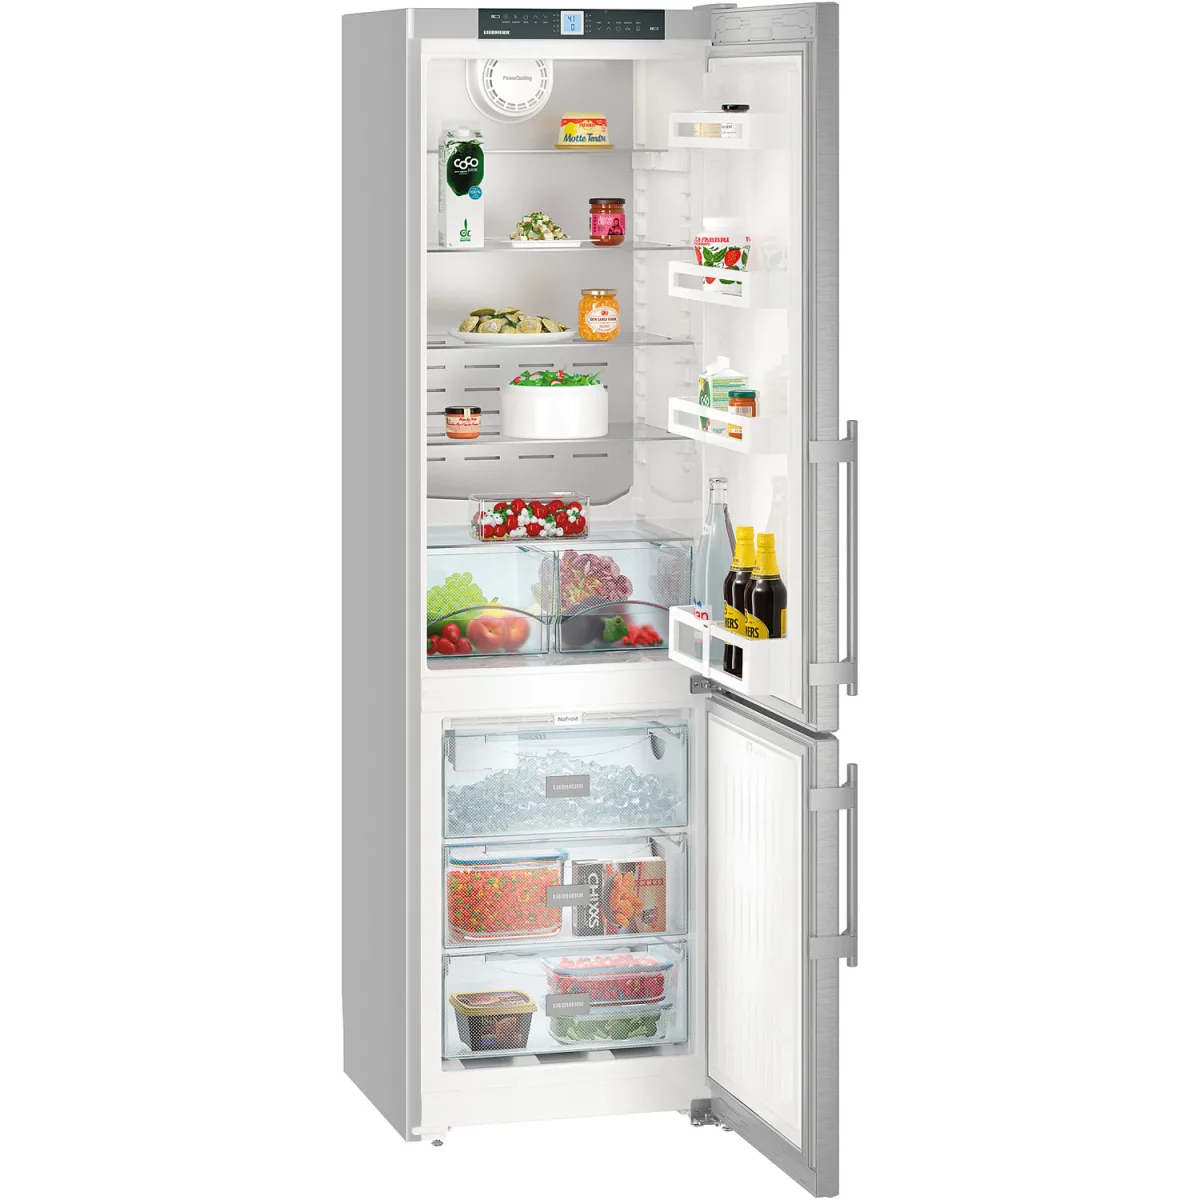 "NoFrost" Combined Refrigerator-Freezers with IceMaker 7081 411-01